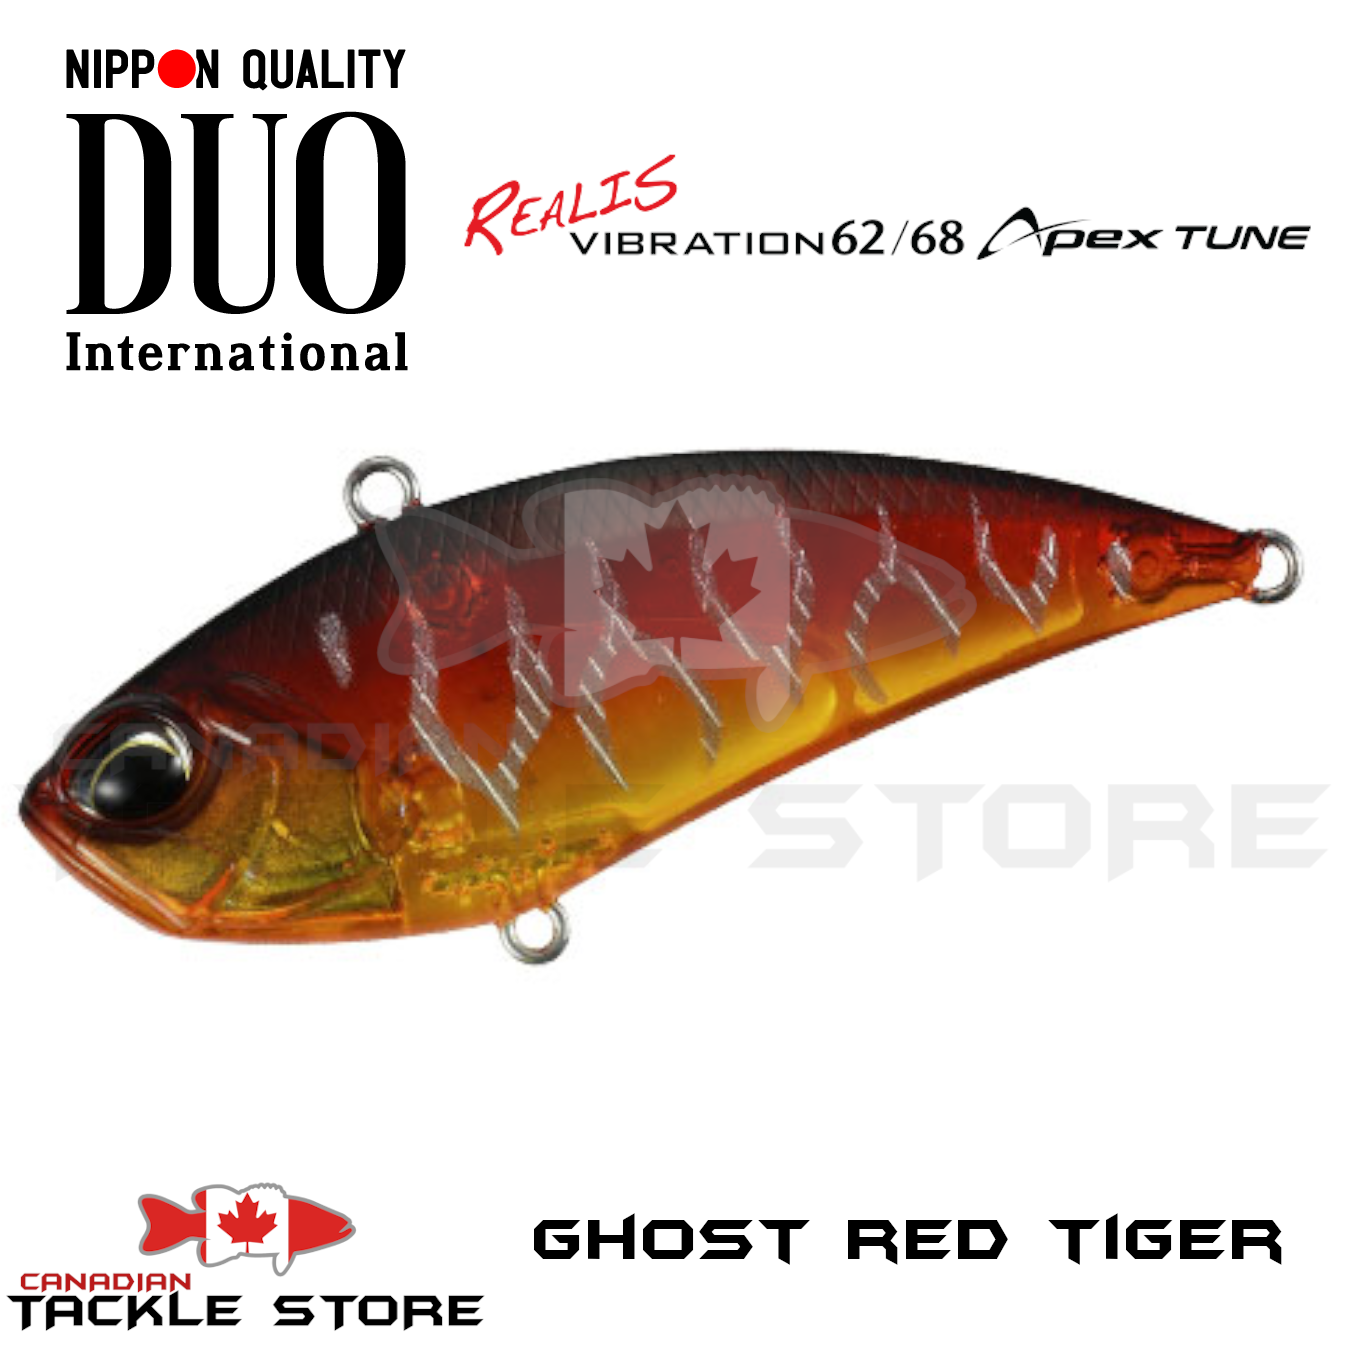 Duo Realis Vibration 62/68 Apex Tune – Canadian Tackle Store